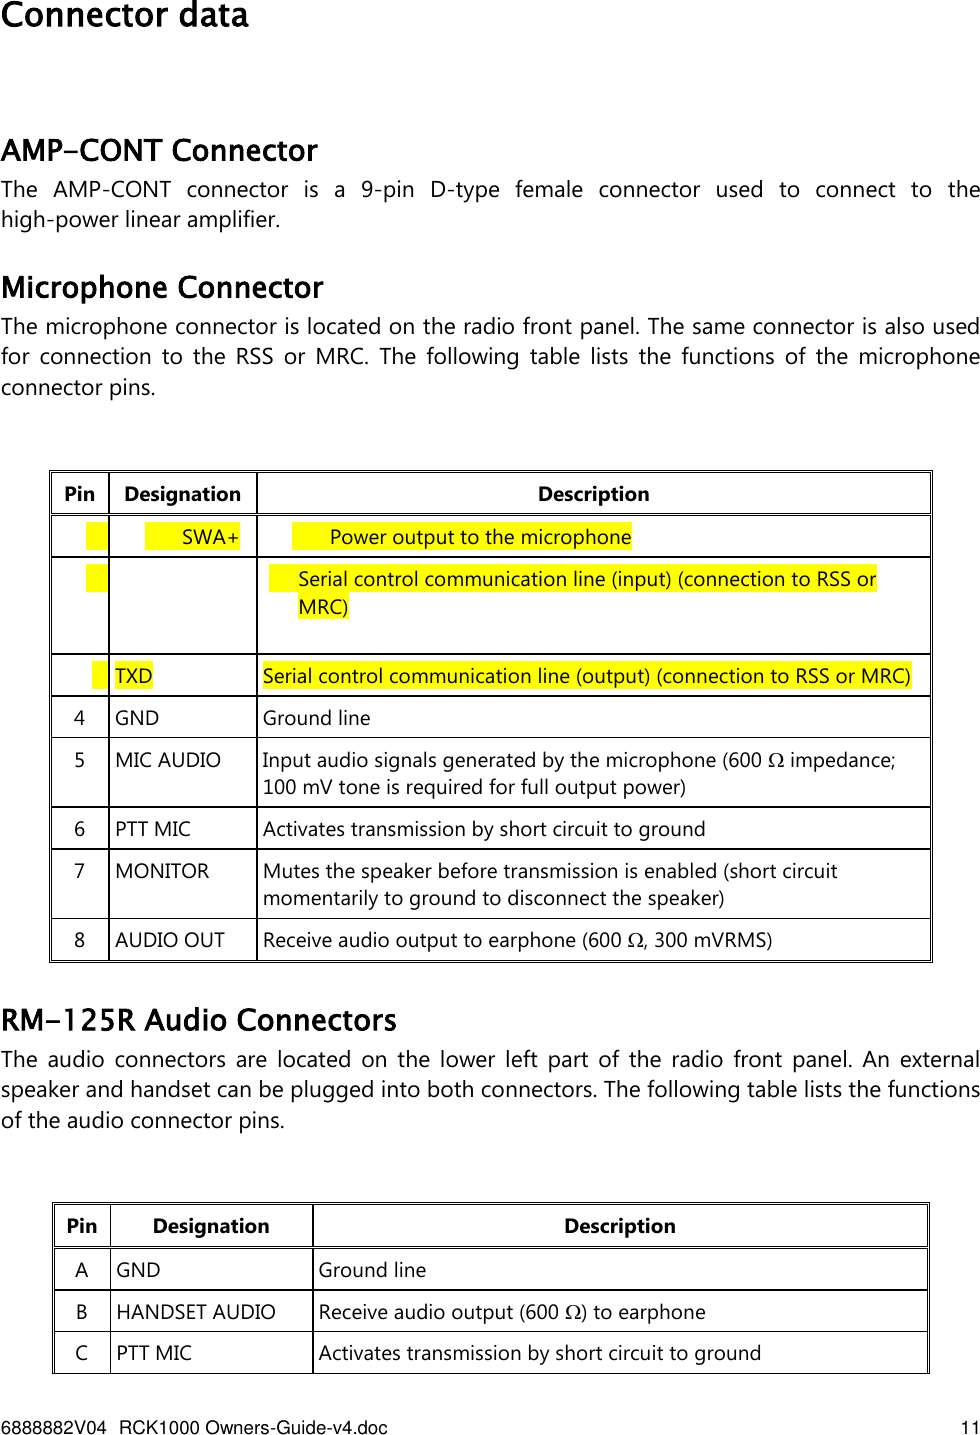 6888882V04 RCK1000 Owners-Guide-v4.doc    11   Connector data   AMP-CONT Connector The  AMP-CONT  connector  is  a  9-pin  D-type  female  connector  used  to  connect  to  the high-power linear amplifier.  Microphone Connector The microphone connector is located on the radio front panel. The same connector is also used for  connection  to  the  RSS  or  MRC.  The  following  table  lists  the  functions  of  the  microphone connector pins.  Pin Designation Description  1  SWA+   Power output to the microphone  2  RXD  Serial control communication line (input) (connection to RSS or MRC)  3 TXD Serial control communication line (output) (connection to RSS or MRC) 4 GND Ground line 5 MIC AUDIO Input audio signals generated by the microphone (600  impedance; 100 mV tone is required for full output power) 6 PTT MIC Activates transmission by short circuit to ground 7 MONITOR Mutes the speaker before transmission is enabled (short circuit momentarily to ground to disconnect the speaker) 8 AUDIO OUT Receive audio output to earphone (600 , 300 mVRMS)  RM-125R Audio Connectors The  audio  connectors are  located  on  the  lower  left  part  of  the  radio  front  panel.  An  external speaker and handset can be plugged into both connectors. The following table lists the functions of the audio connector pins.  Pin Designation Description A GND Ground line B HANDSET AUDIO Receive audio output (600 ) to earphone C PTT MIC Activates transmission by short circuit to ground 